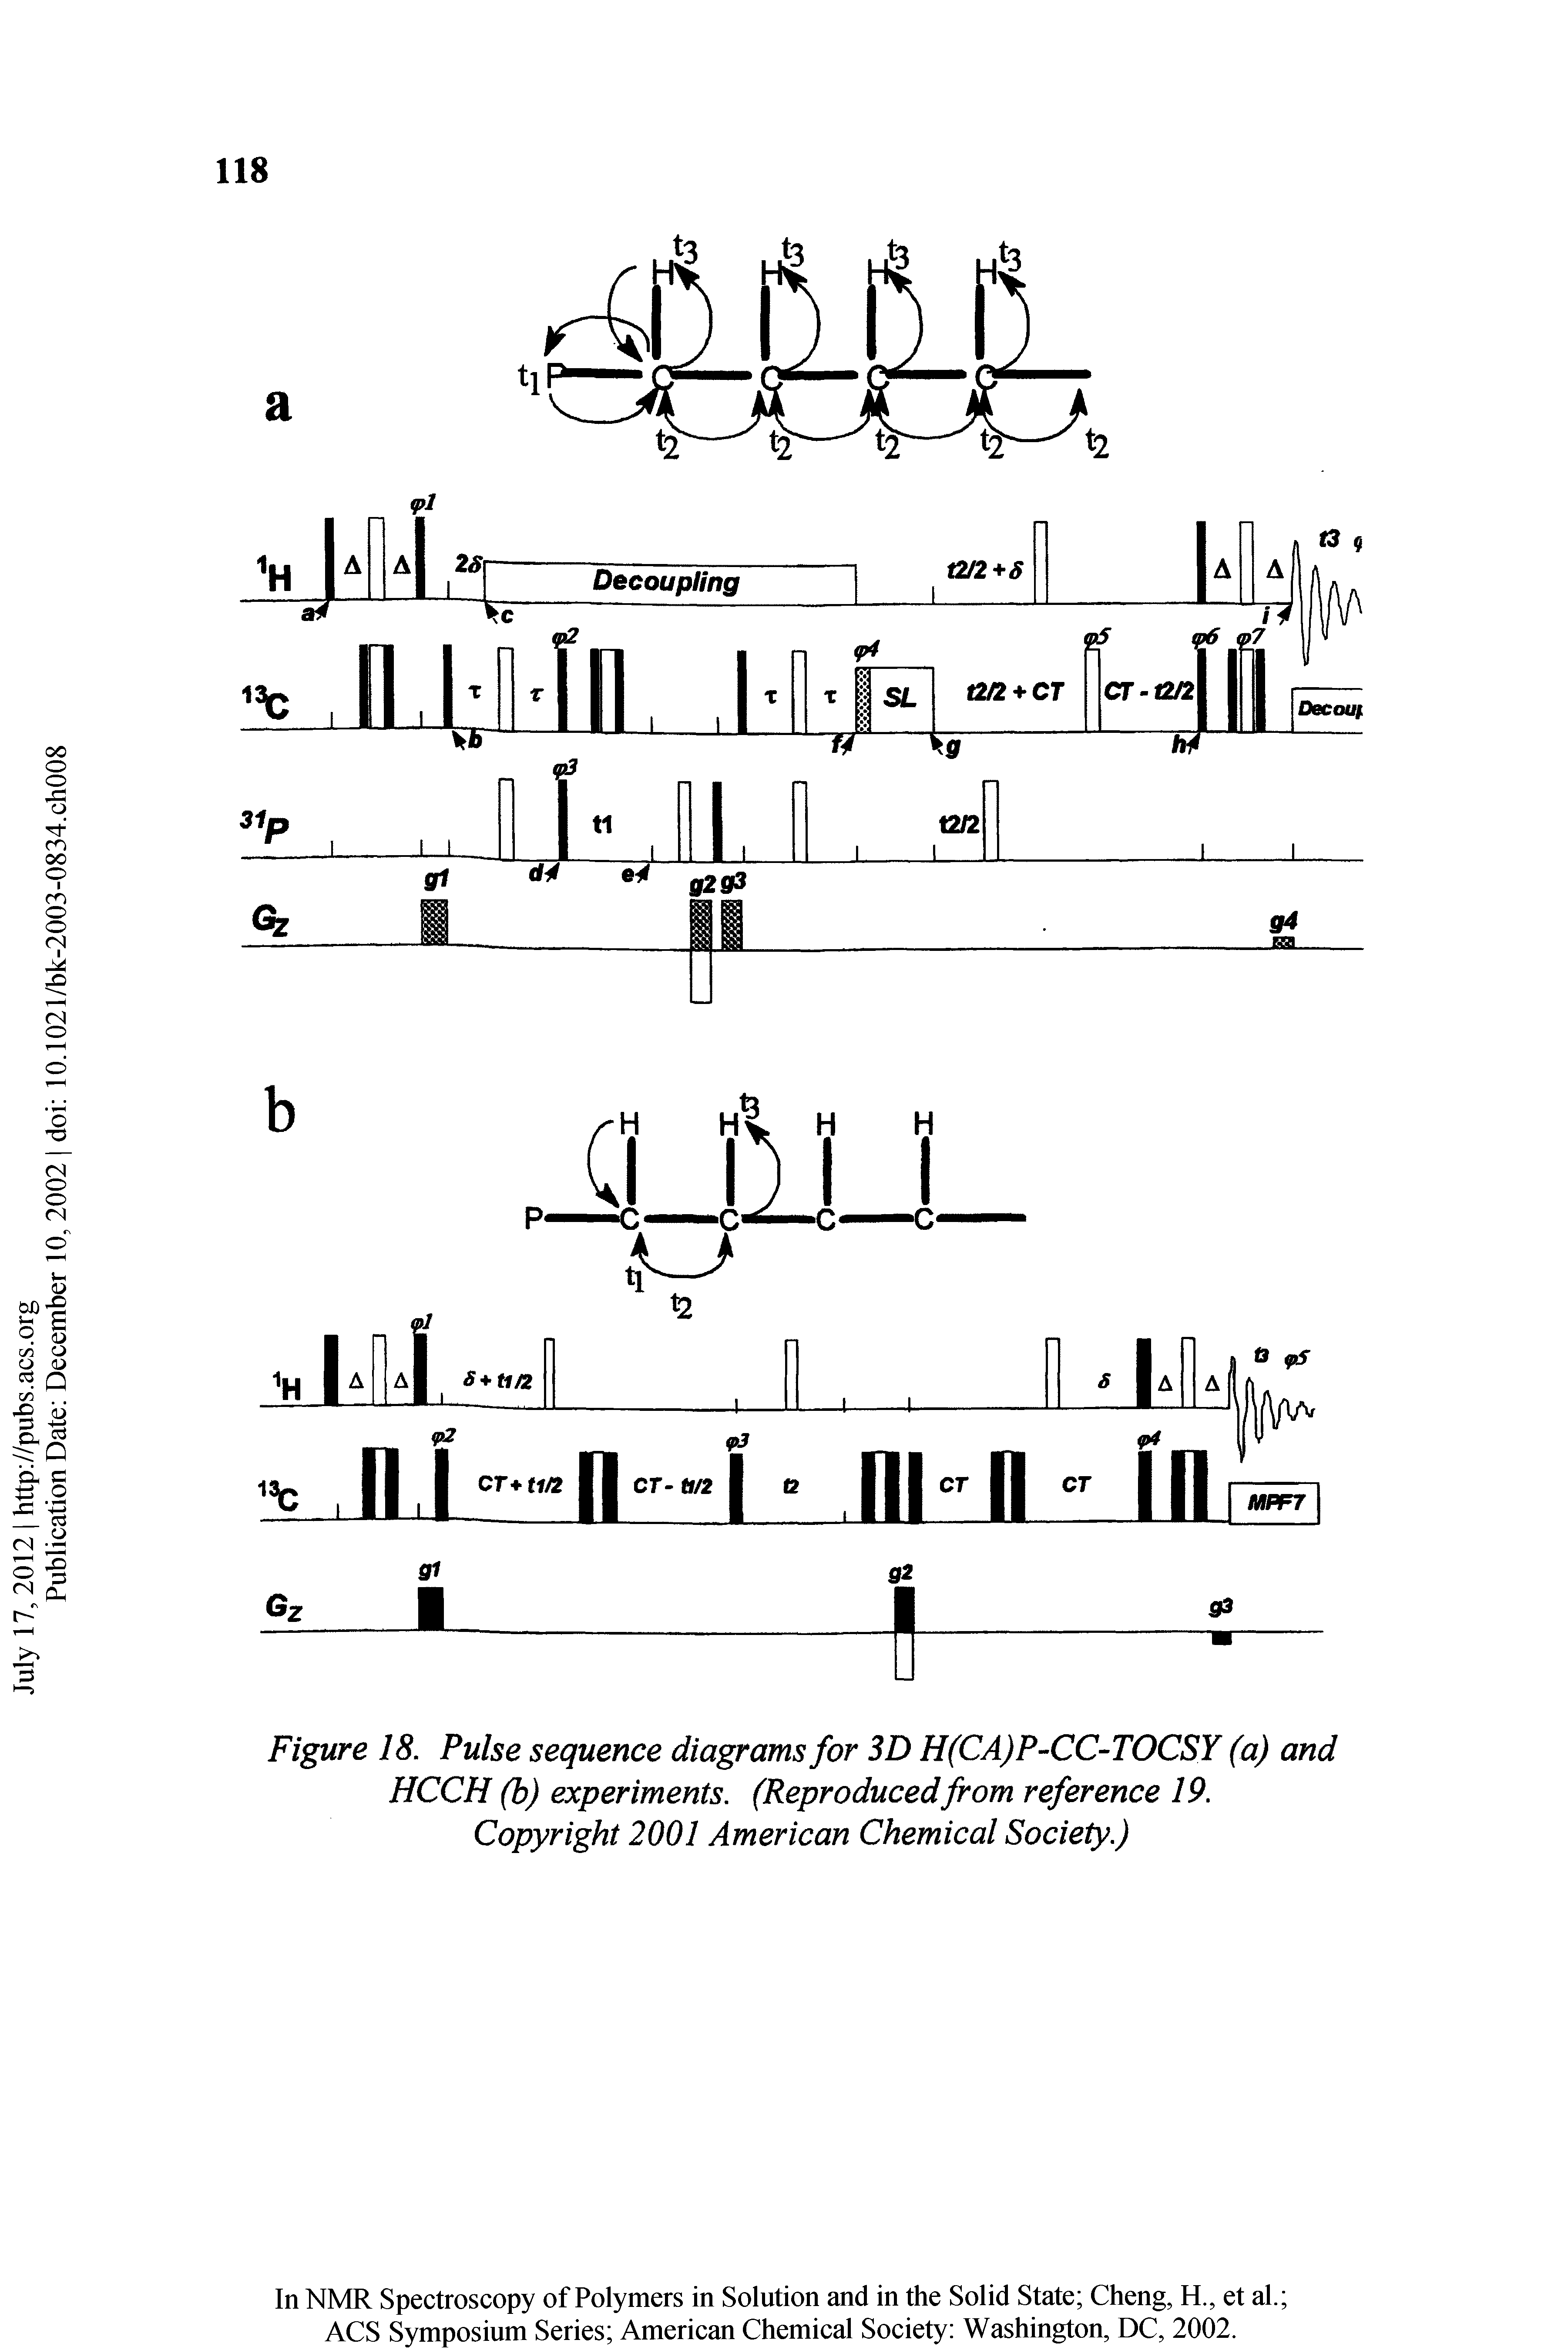 Figure 18. Pulse sequence diagrams for 3D H(CA)P-CC-TOCSY (a) and HCCH (b) experiments. (Reproducedfrom reference 19. Copyright 2001 American Chemical Society.)...